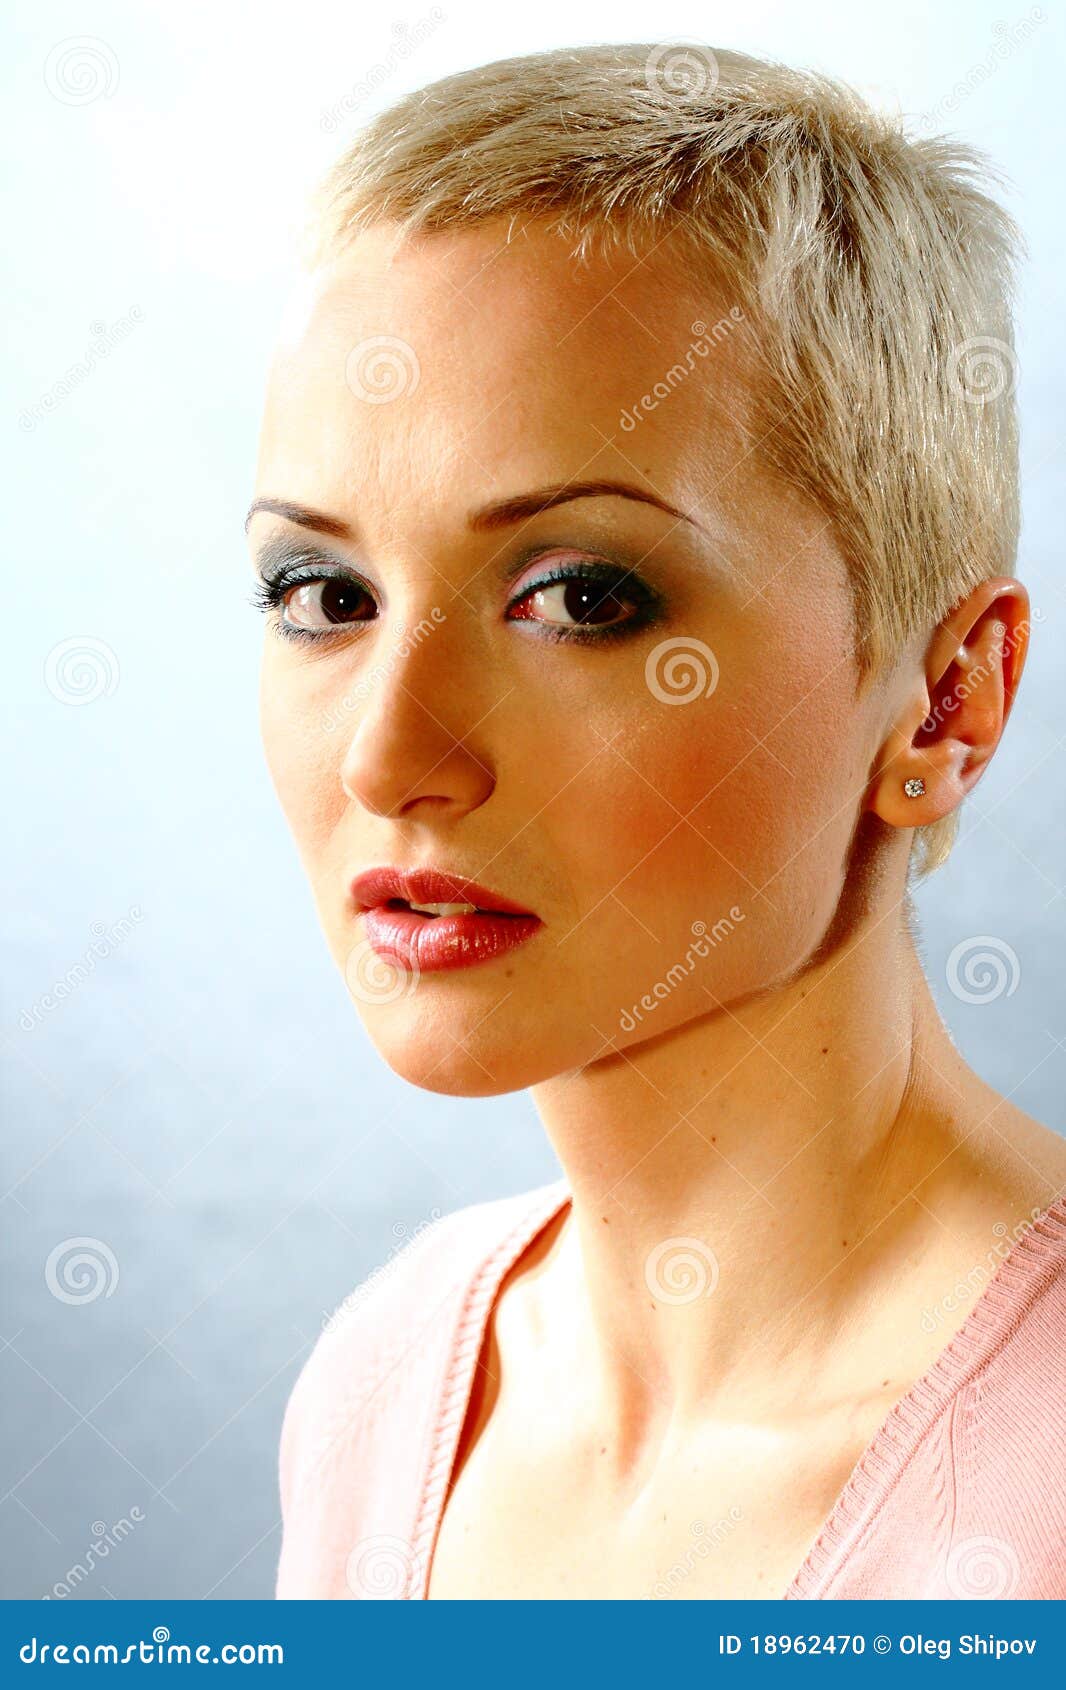 Fashion Model With Short Hair Stock Photo Image Of Portrait Young 18962470